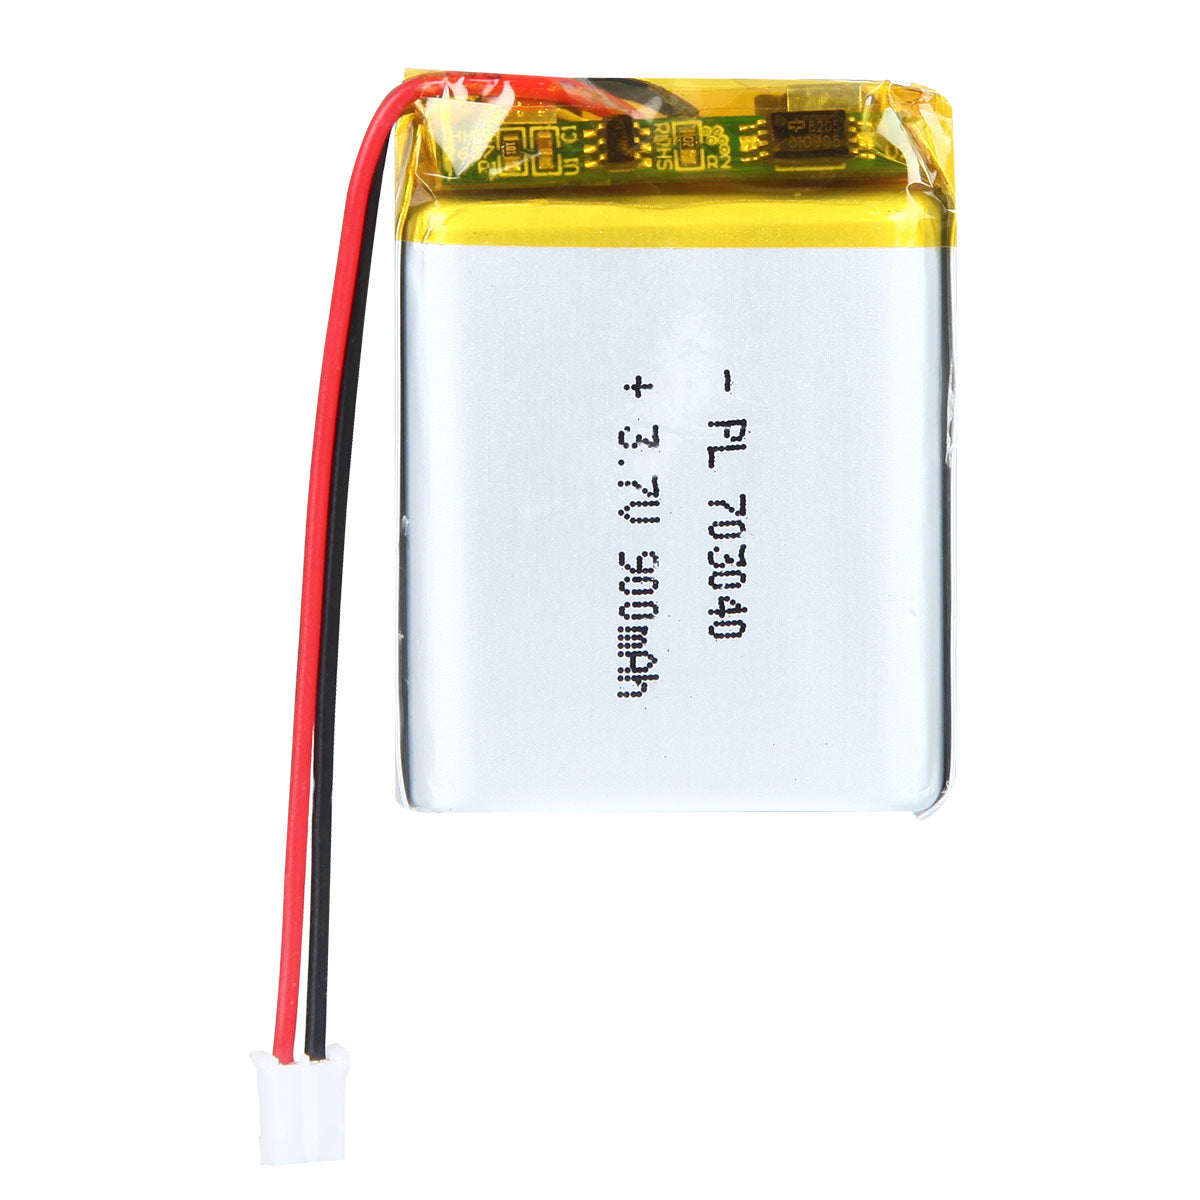 YDL 3.7V 900mAh 703040 Rechargeable Lithium Polymer Battery Length 42mm